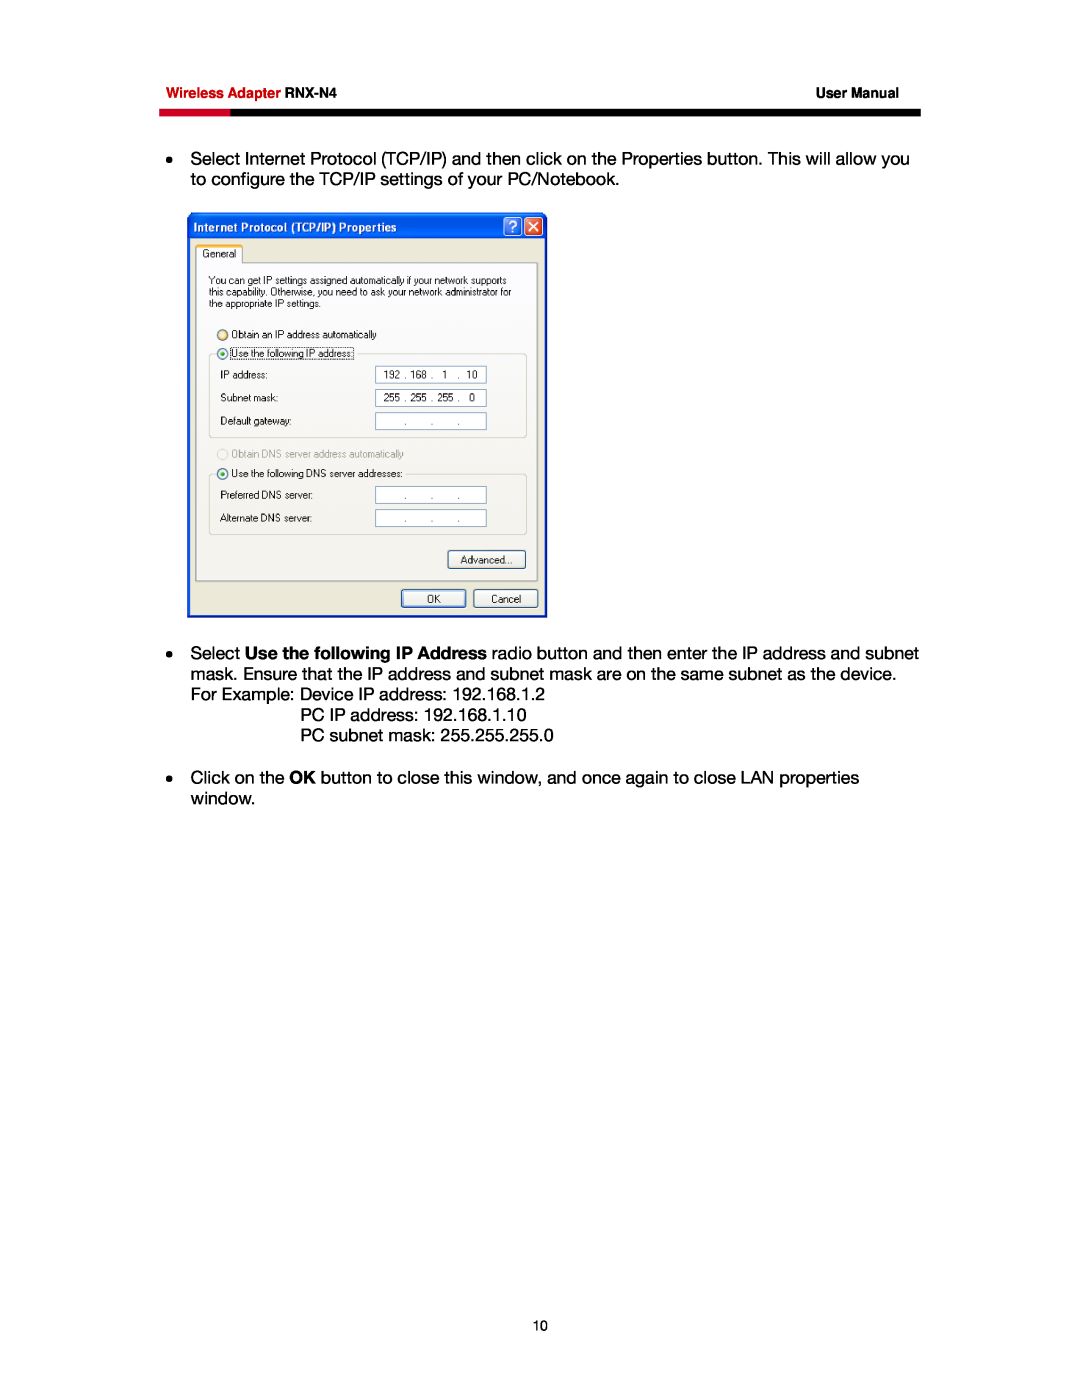 Rosewill RNX-N4 user manual PC IP address PC subnet mask 